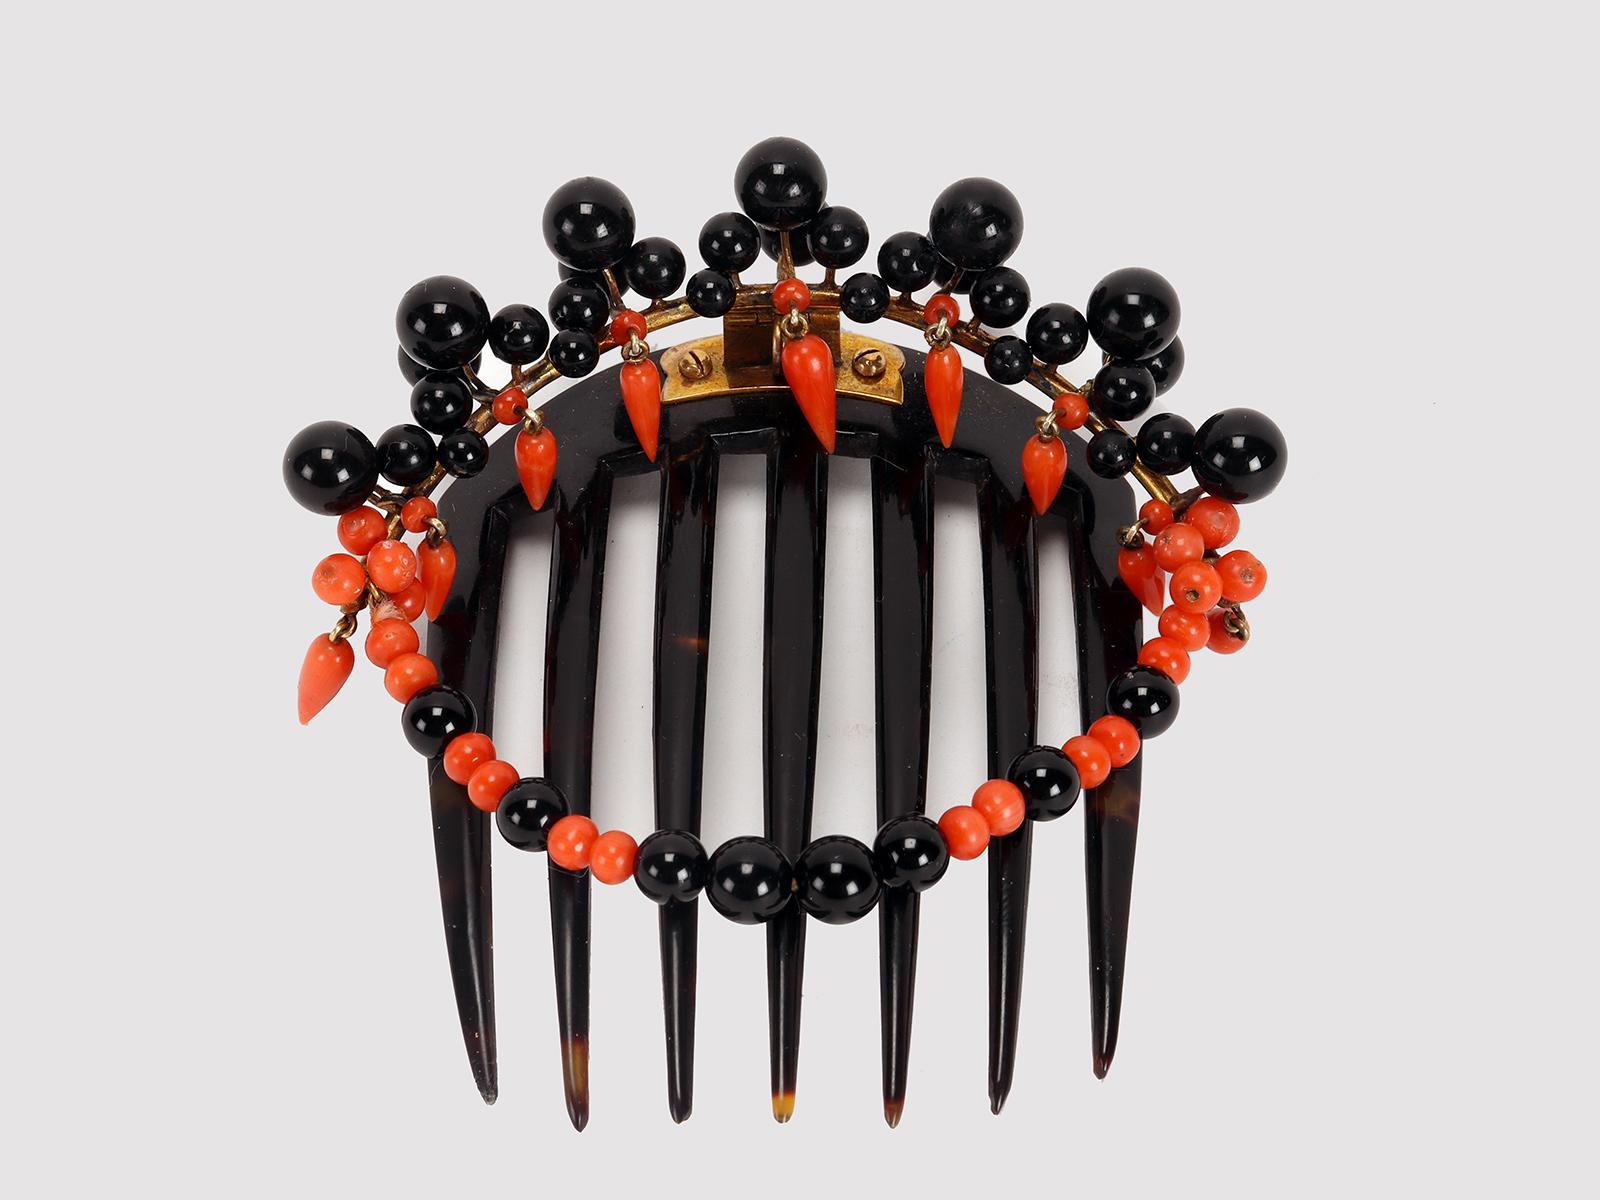 Rare hair comb, diadem, turtleshell, surmounted by a gilt silver element decorated with volutes in an entourage of natural Mediterranean coral pearls (Rubrum Corallium) of an orange-red color and drops, also in coral, with pearls of different sizes